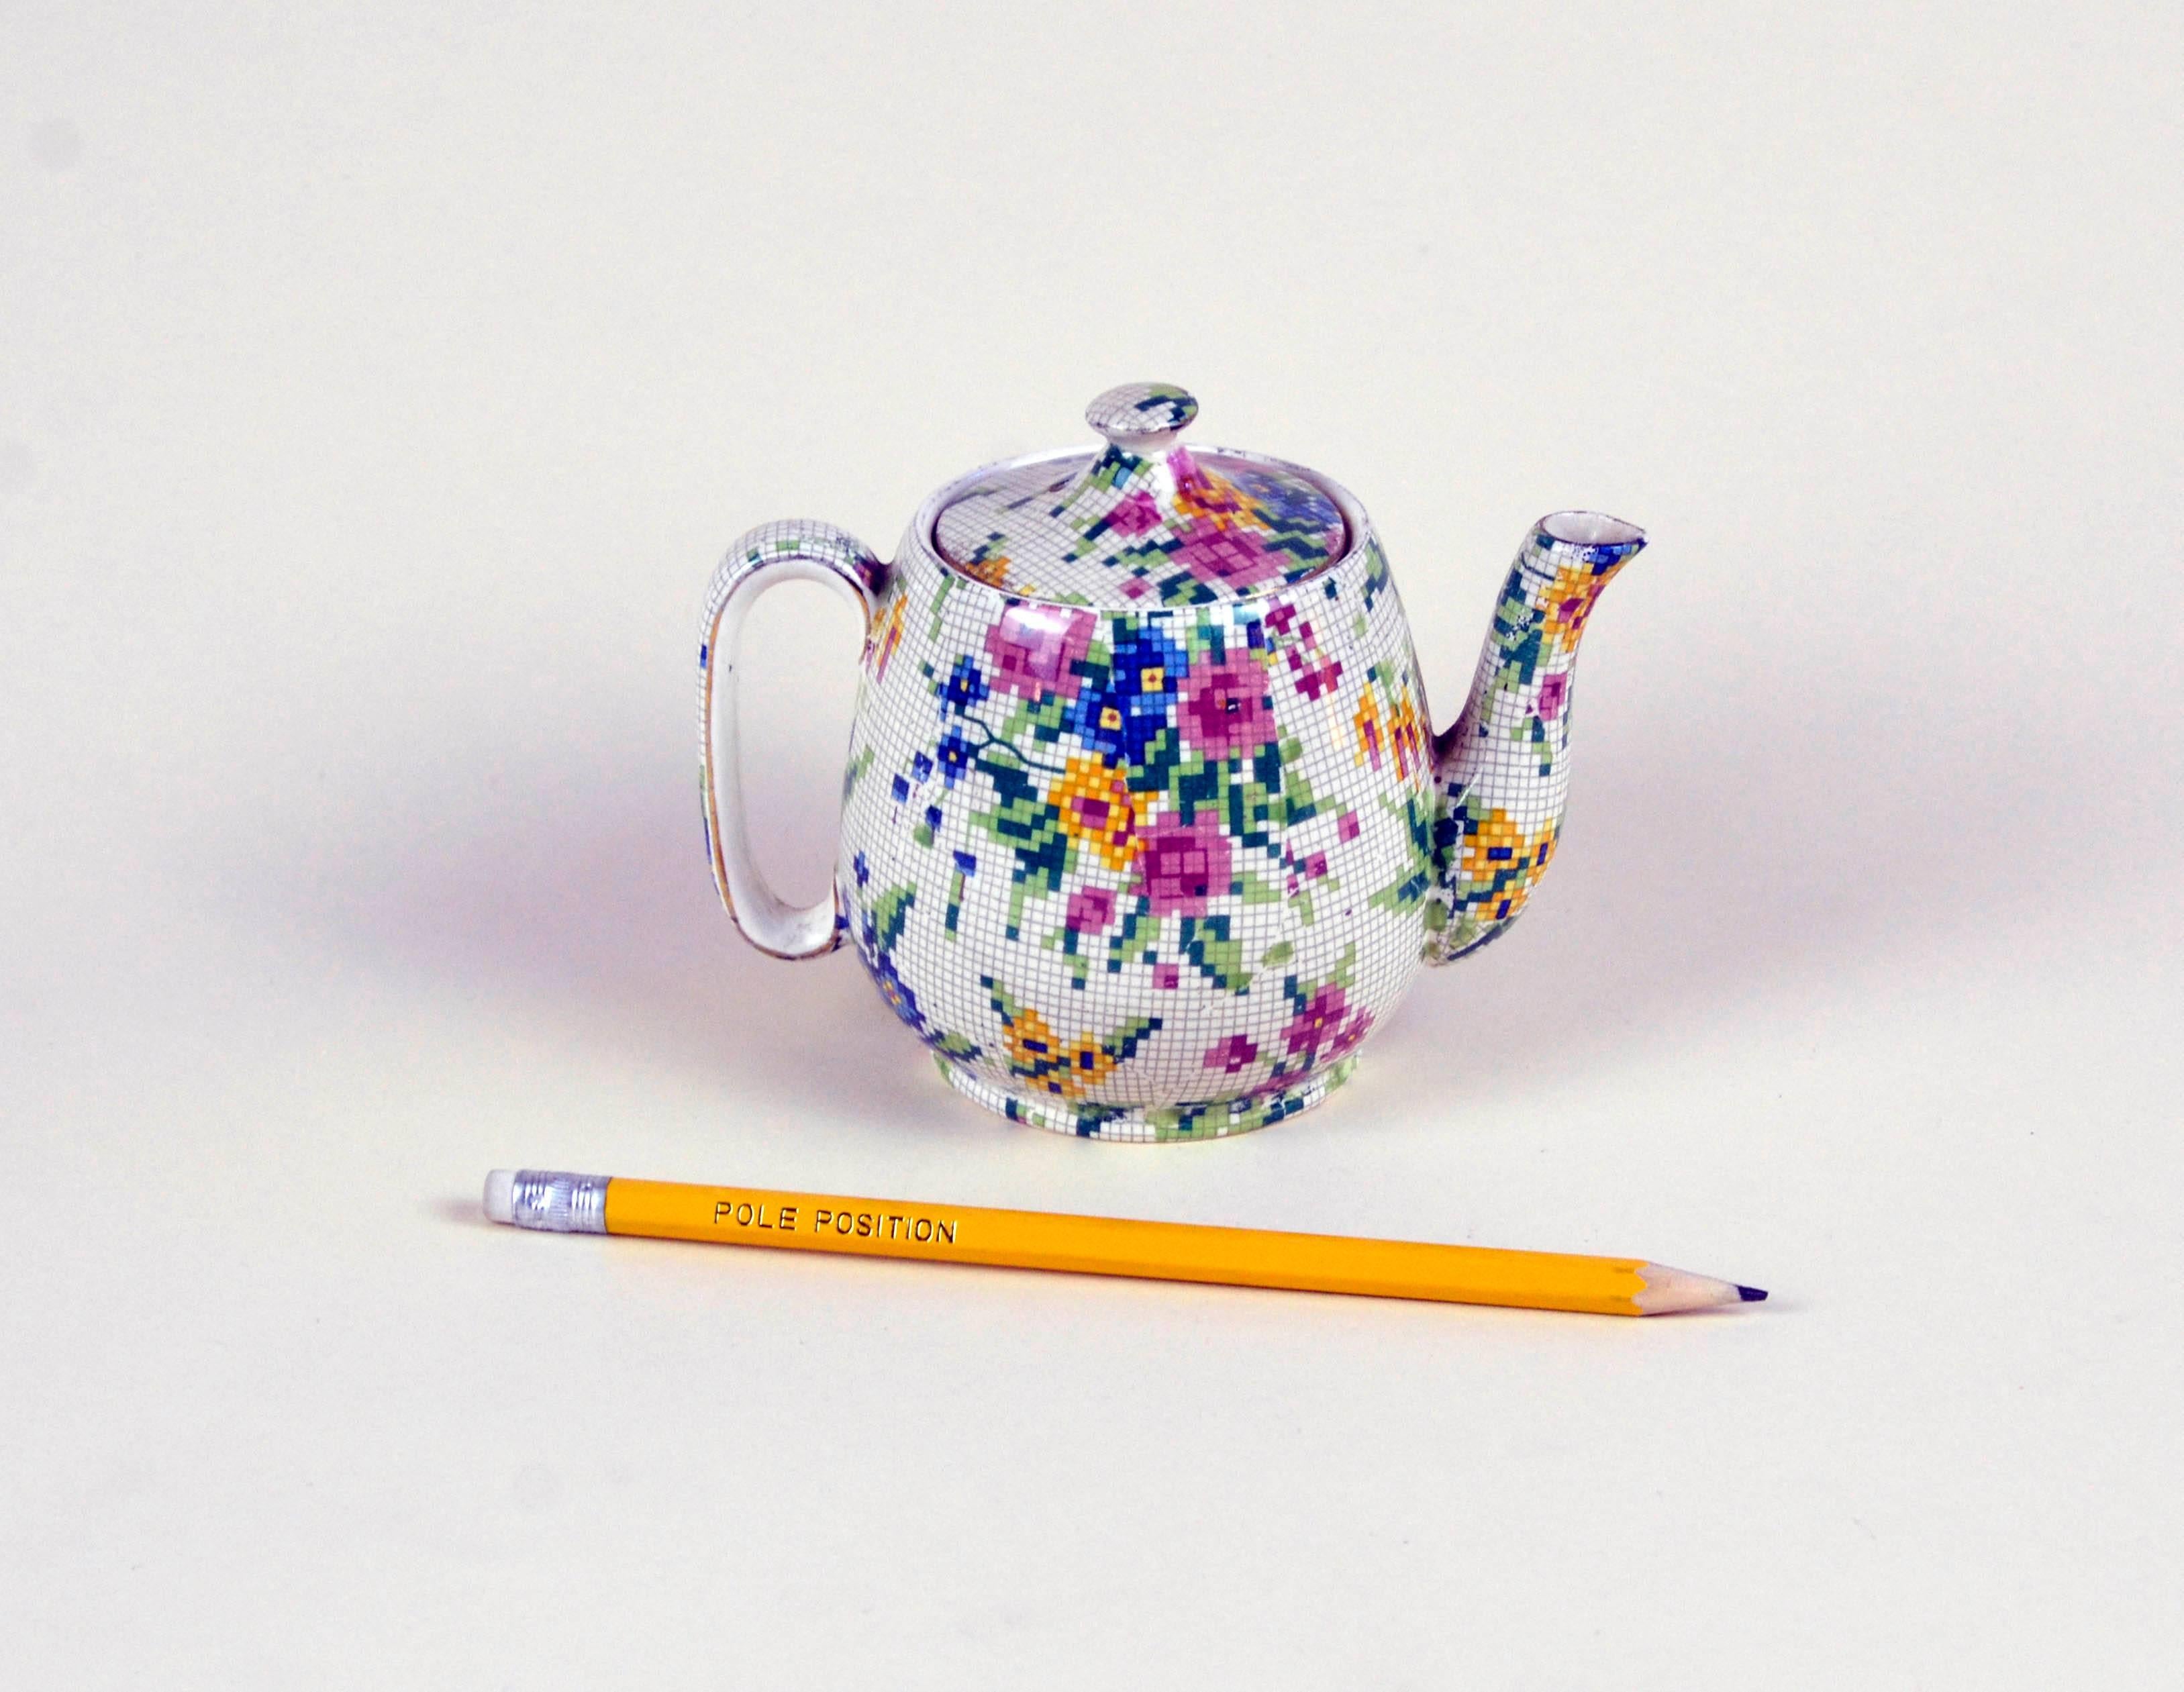 Rare Royal Winton little earthenware teapot in pristine condition, not restored and ready to be used. The Queen Anne (1936) needlepoint pattern is part of the famed Chintz collection by Royal Winton. It consist of bouquets of flowers in pink, blue